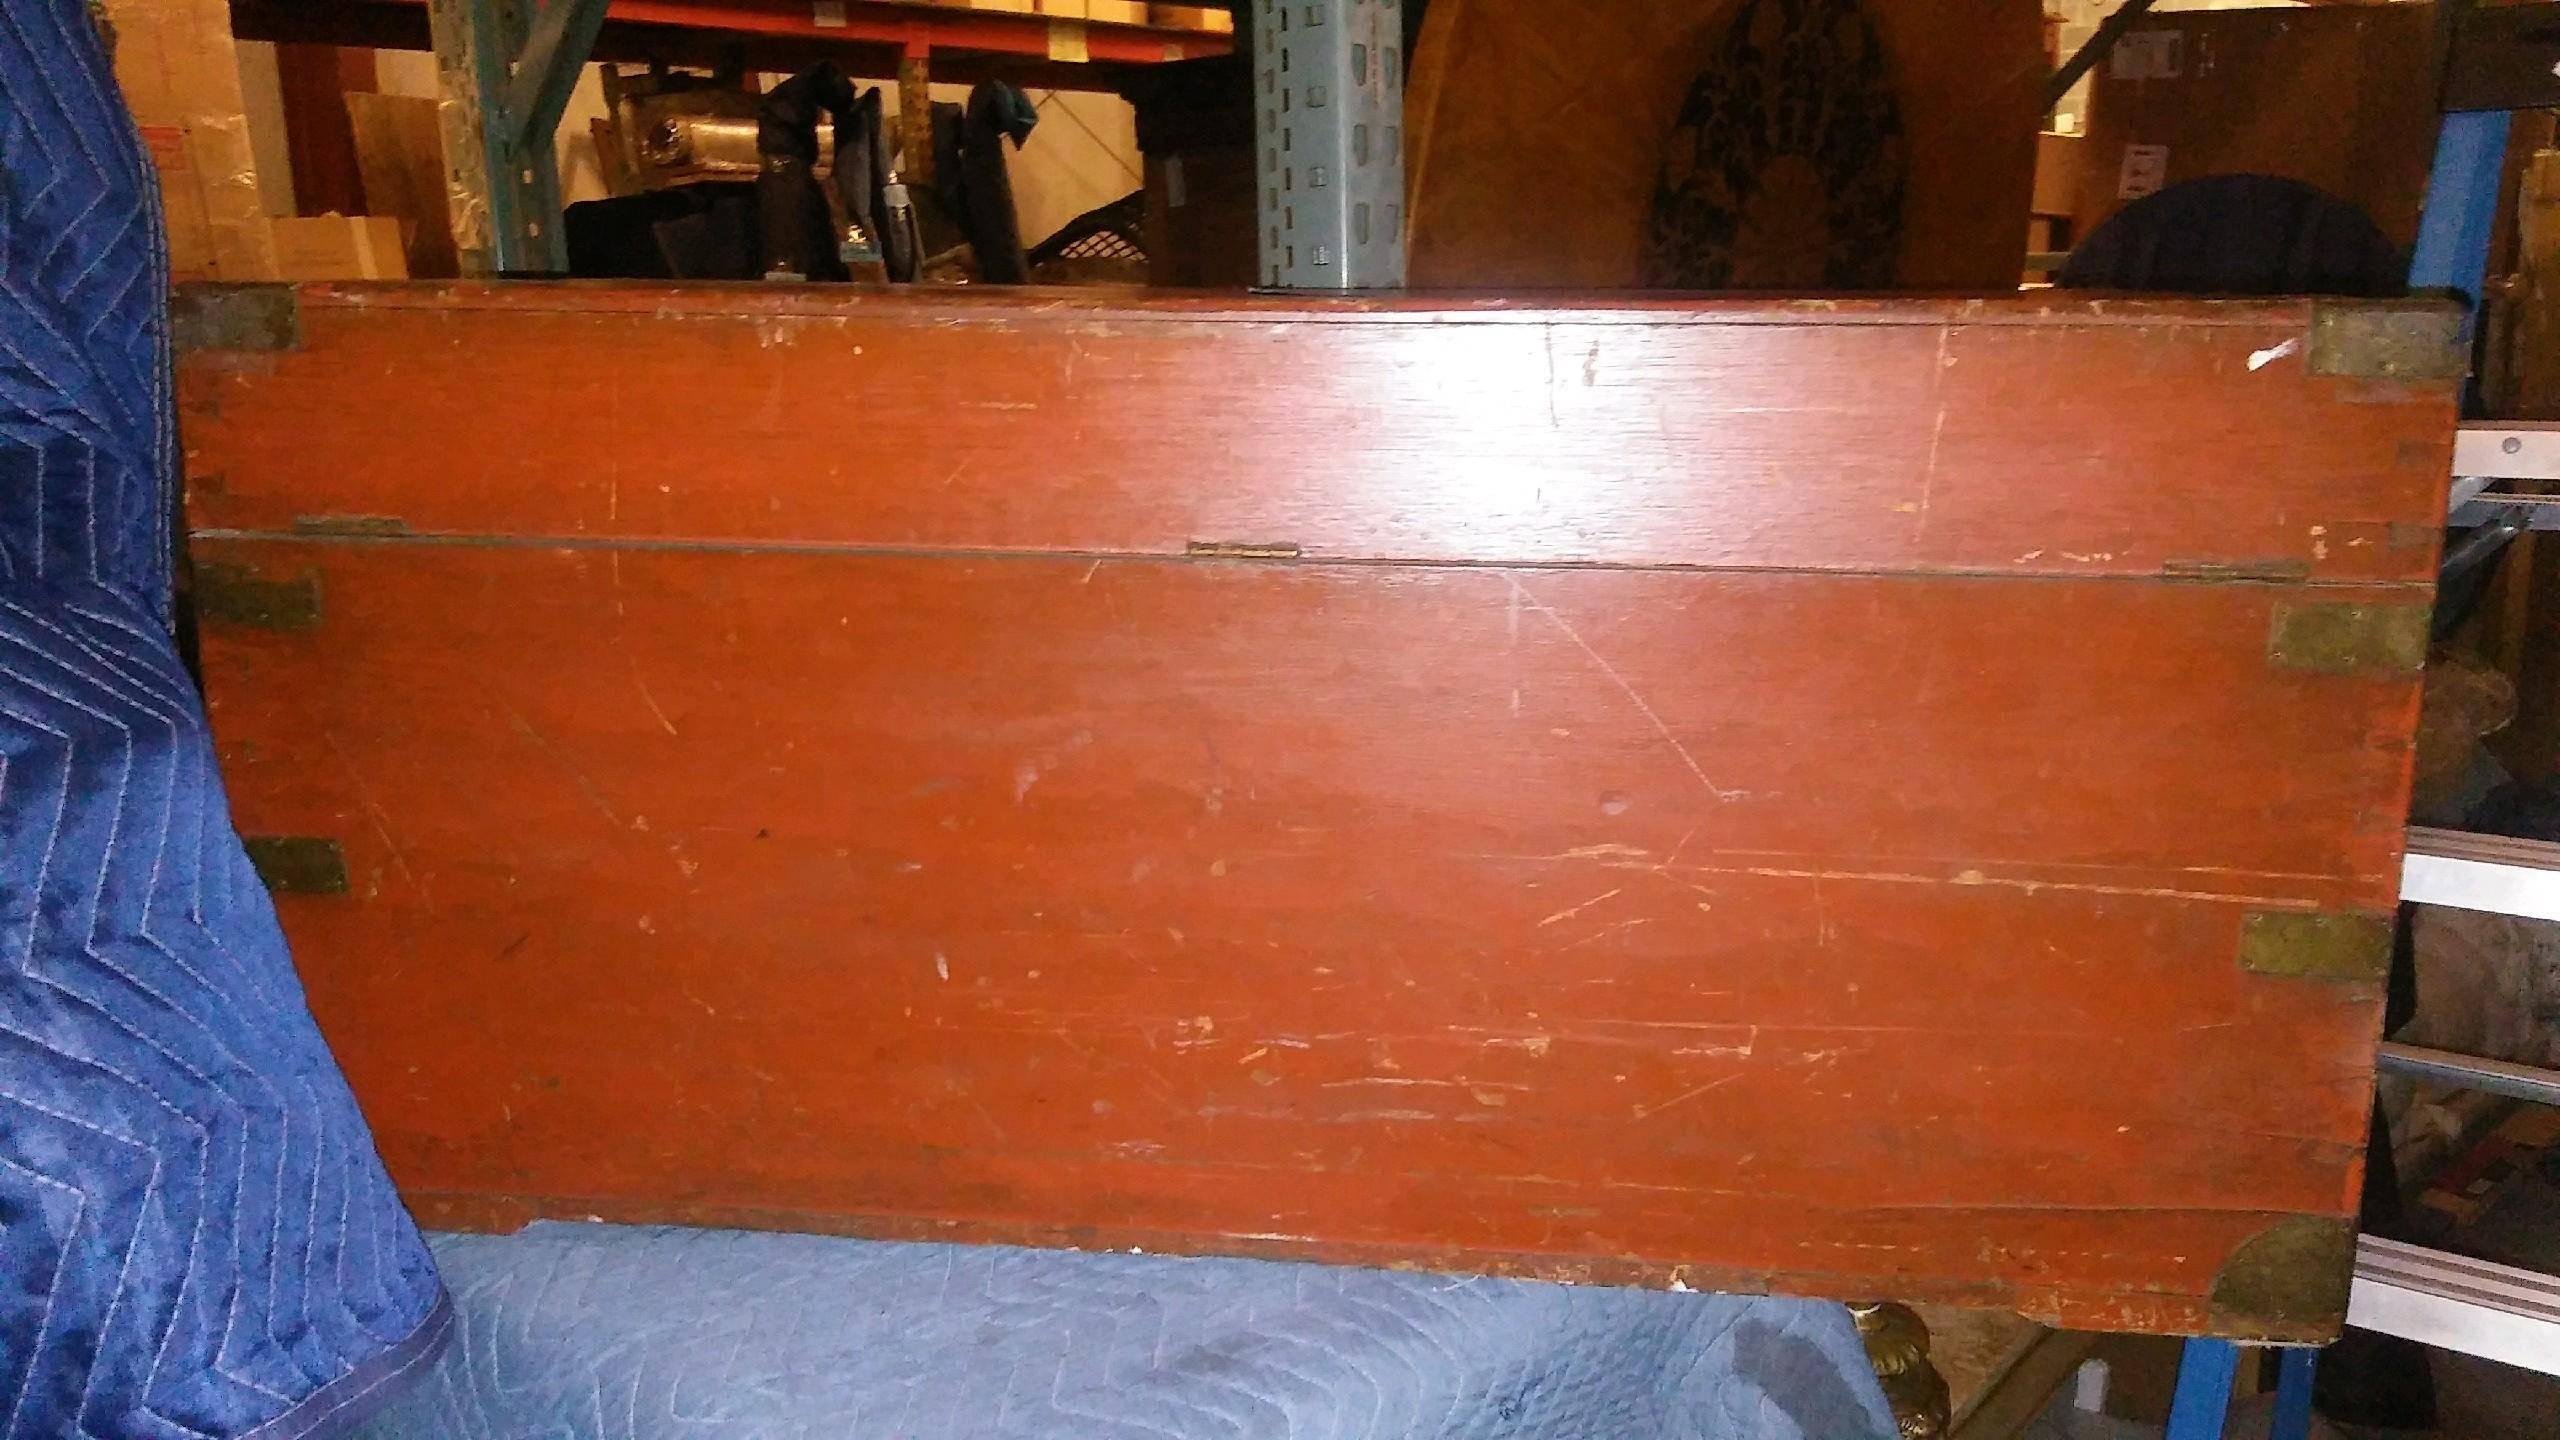 Unknown English Camphor Shipping Trunk in Orange Paint, Late 19th Century